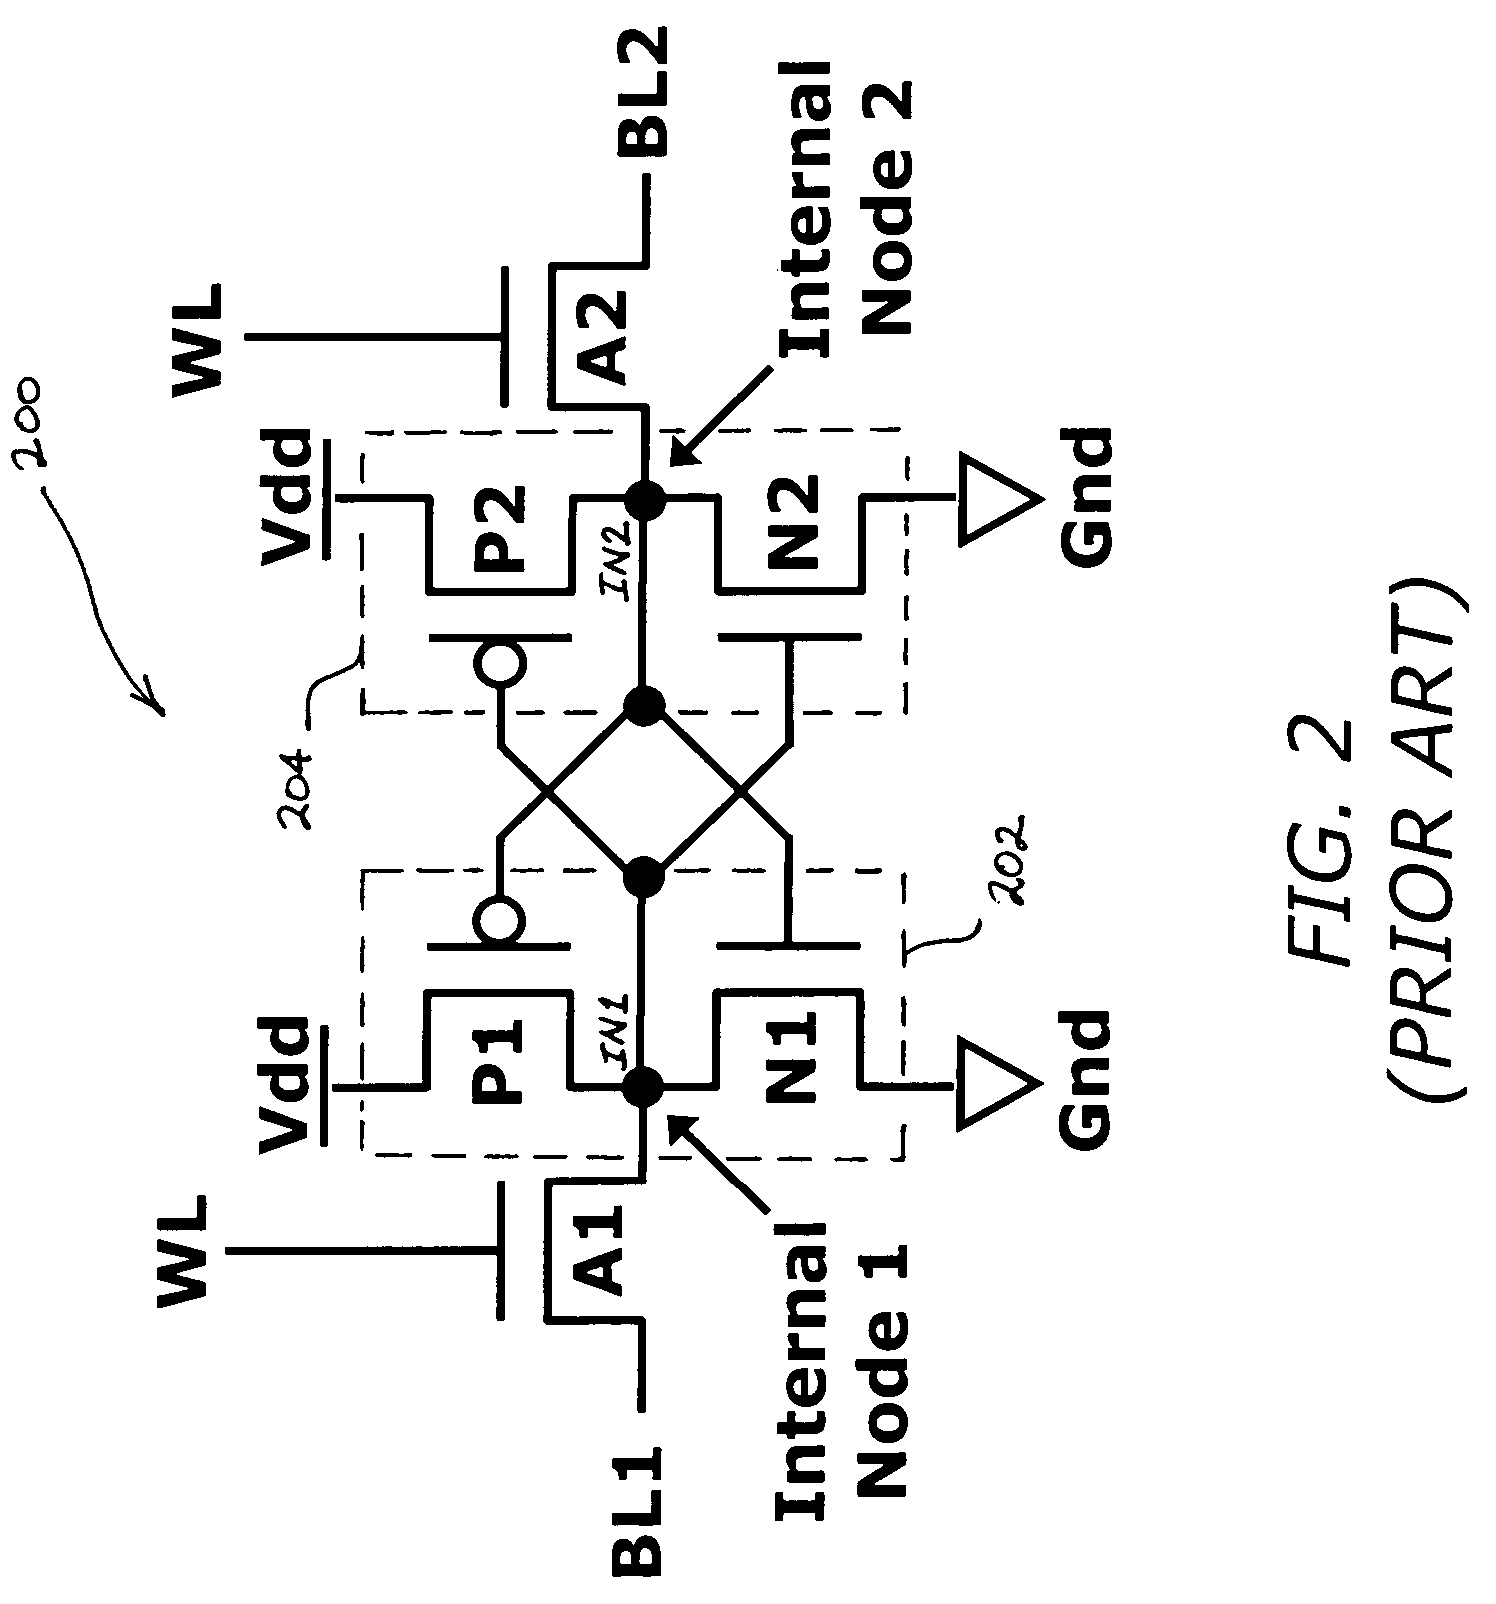 Integrated circuit having gates and active regions forming a regular grating